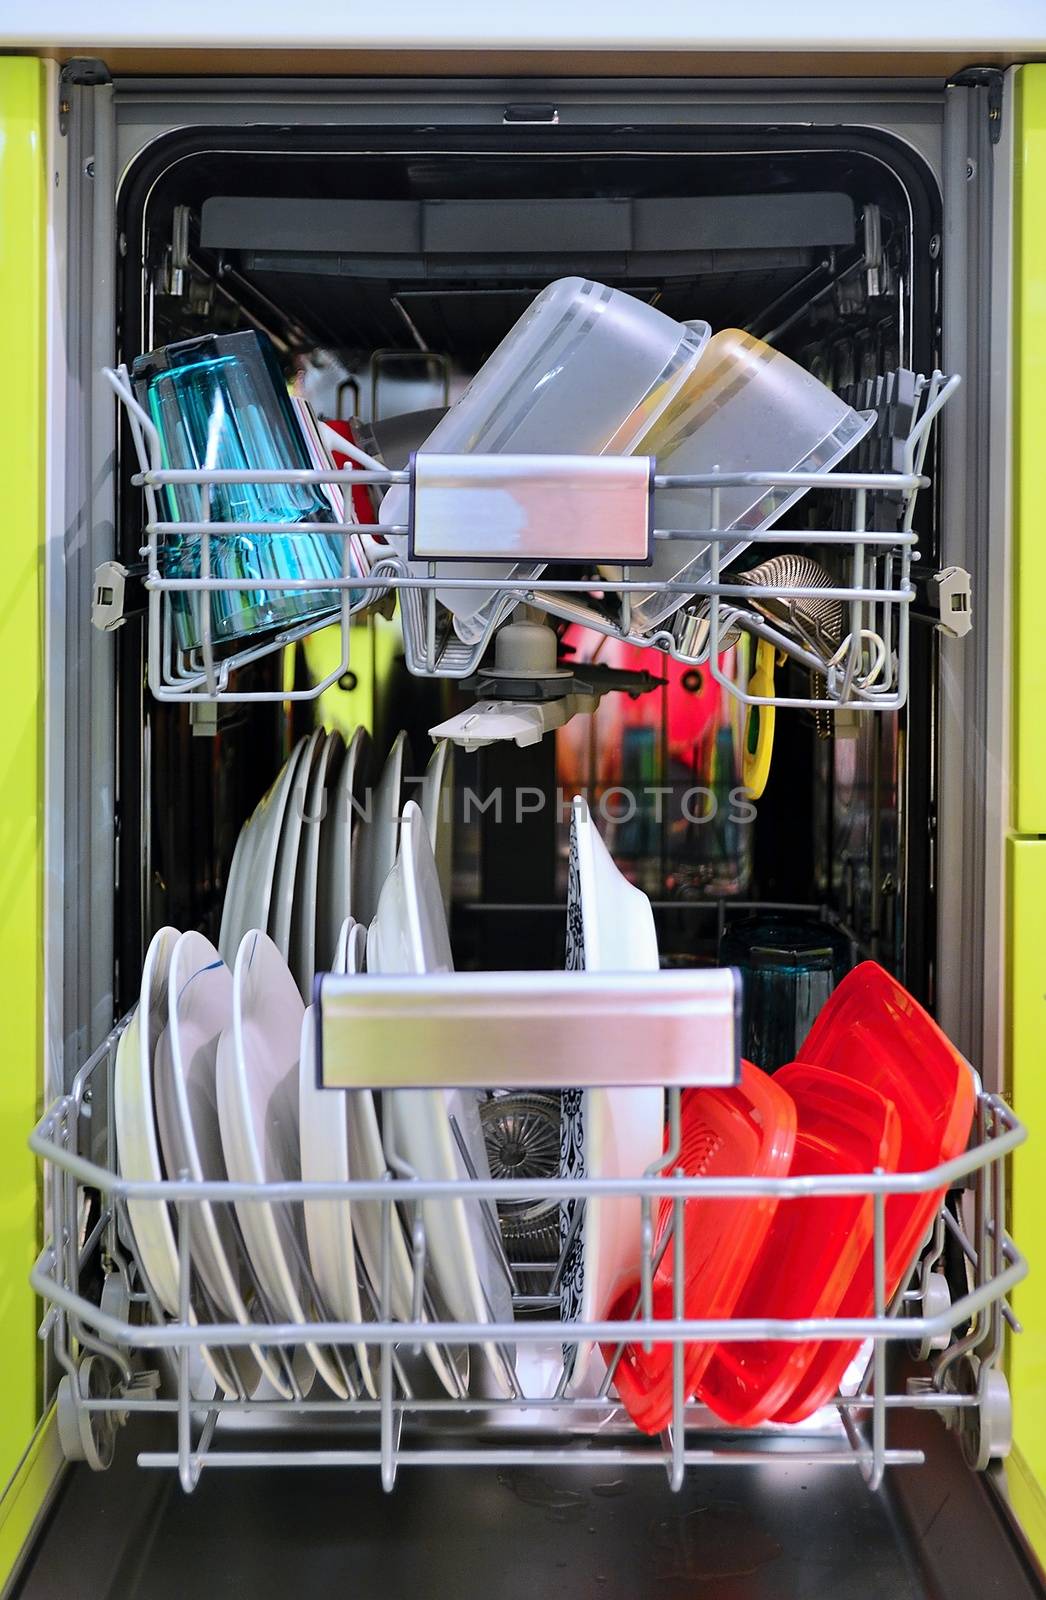 Front view of full loaded dishwasher by hamik